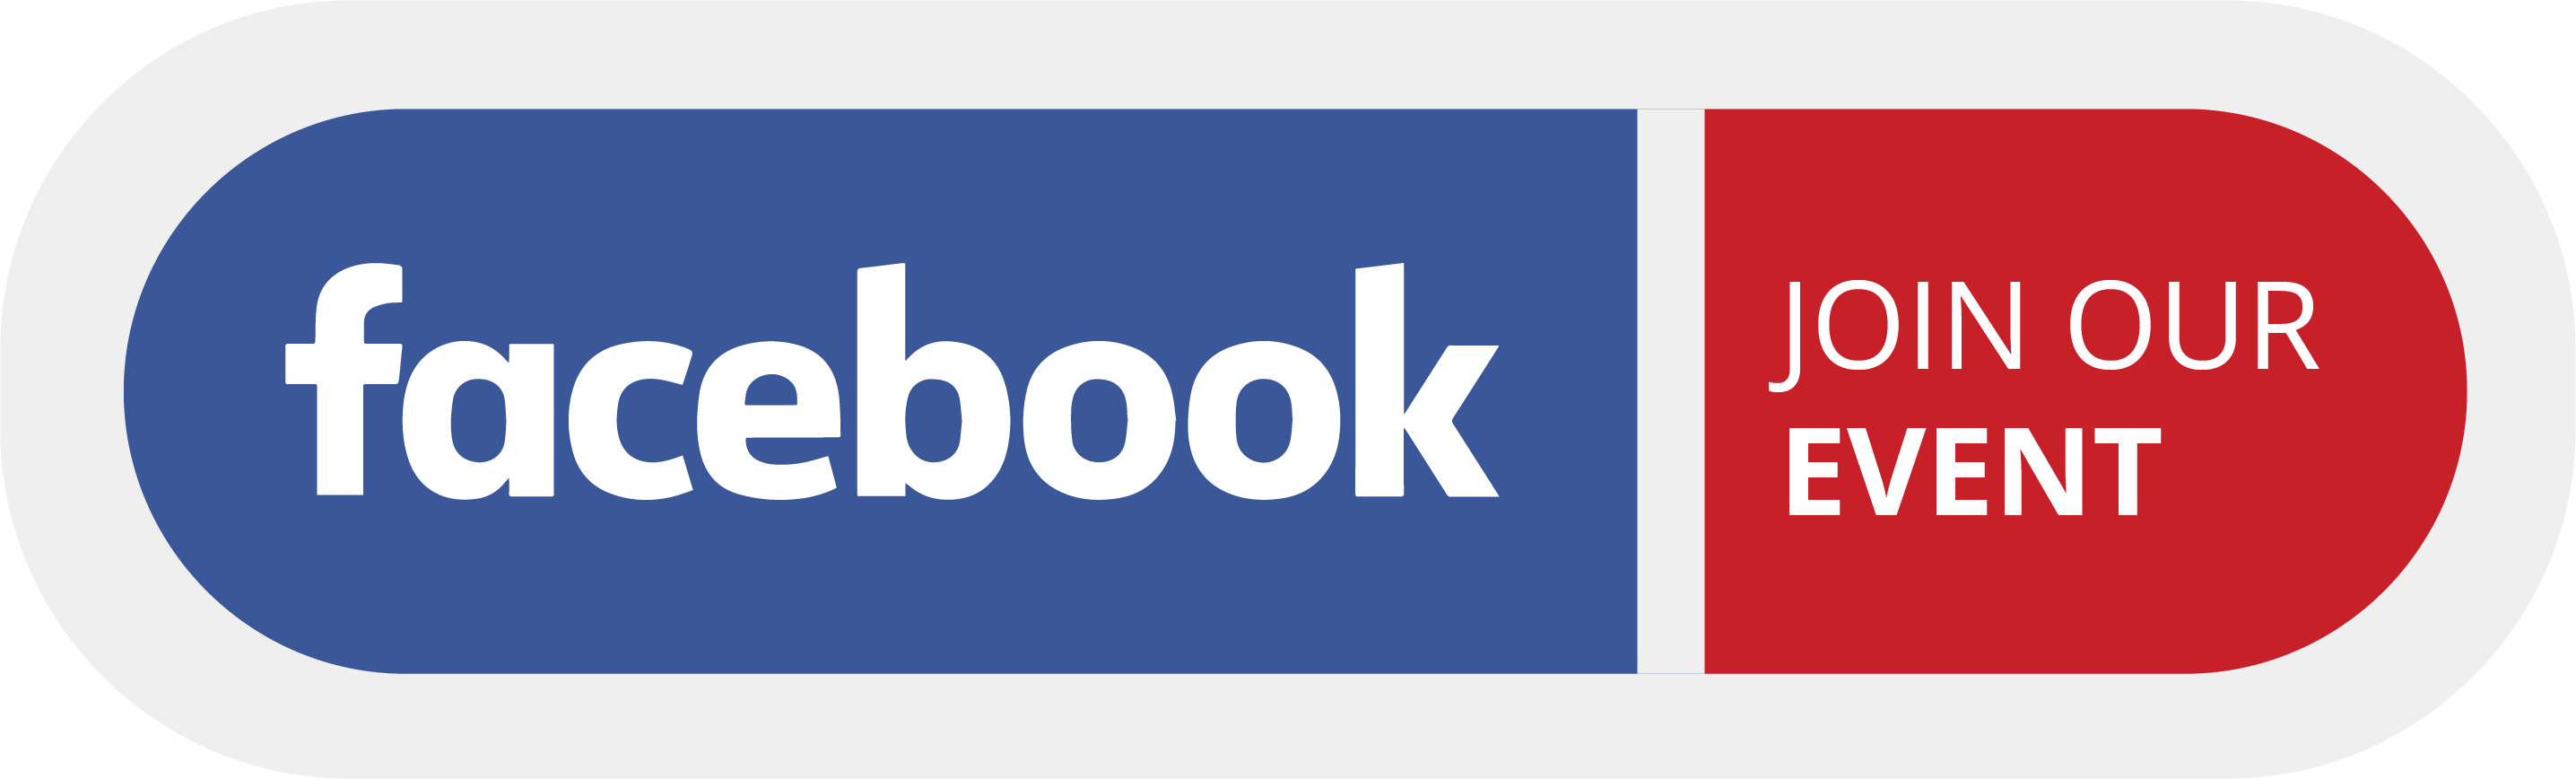 Facebook-Join-our-Event.png